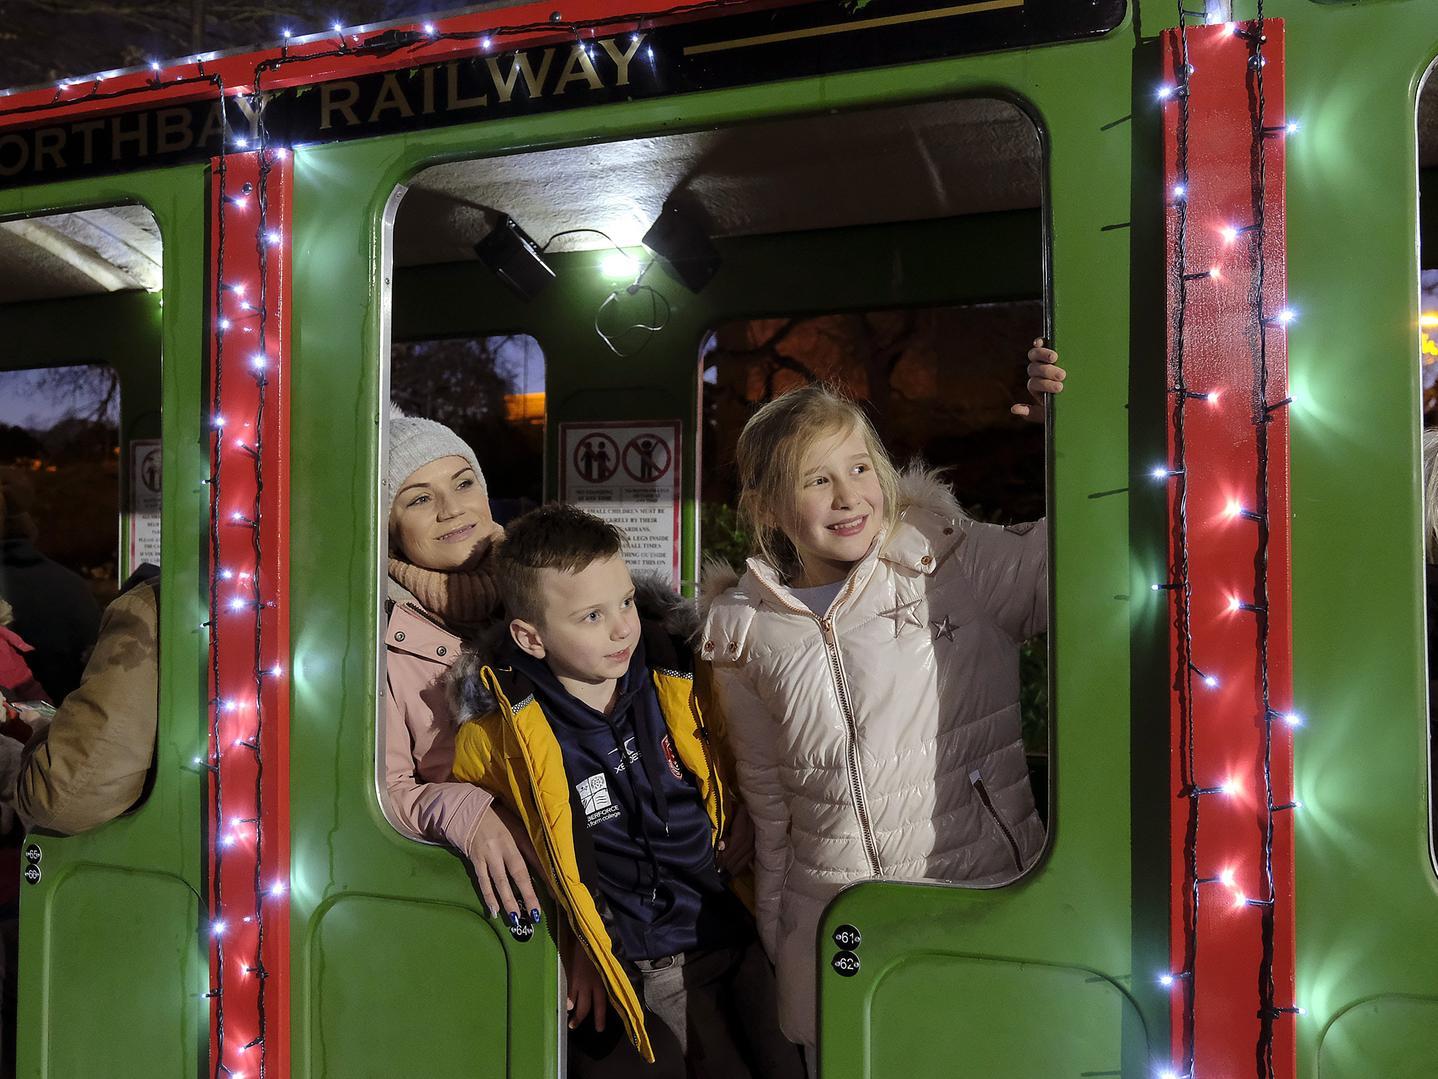 All aboard the Christmas North Bay Railway.